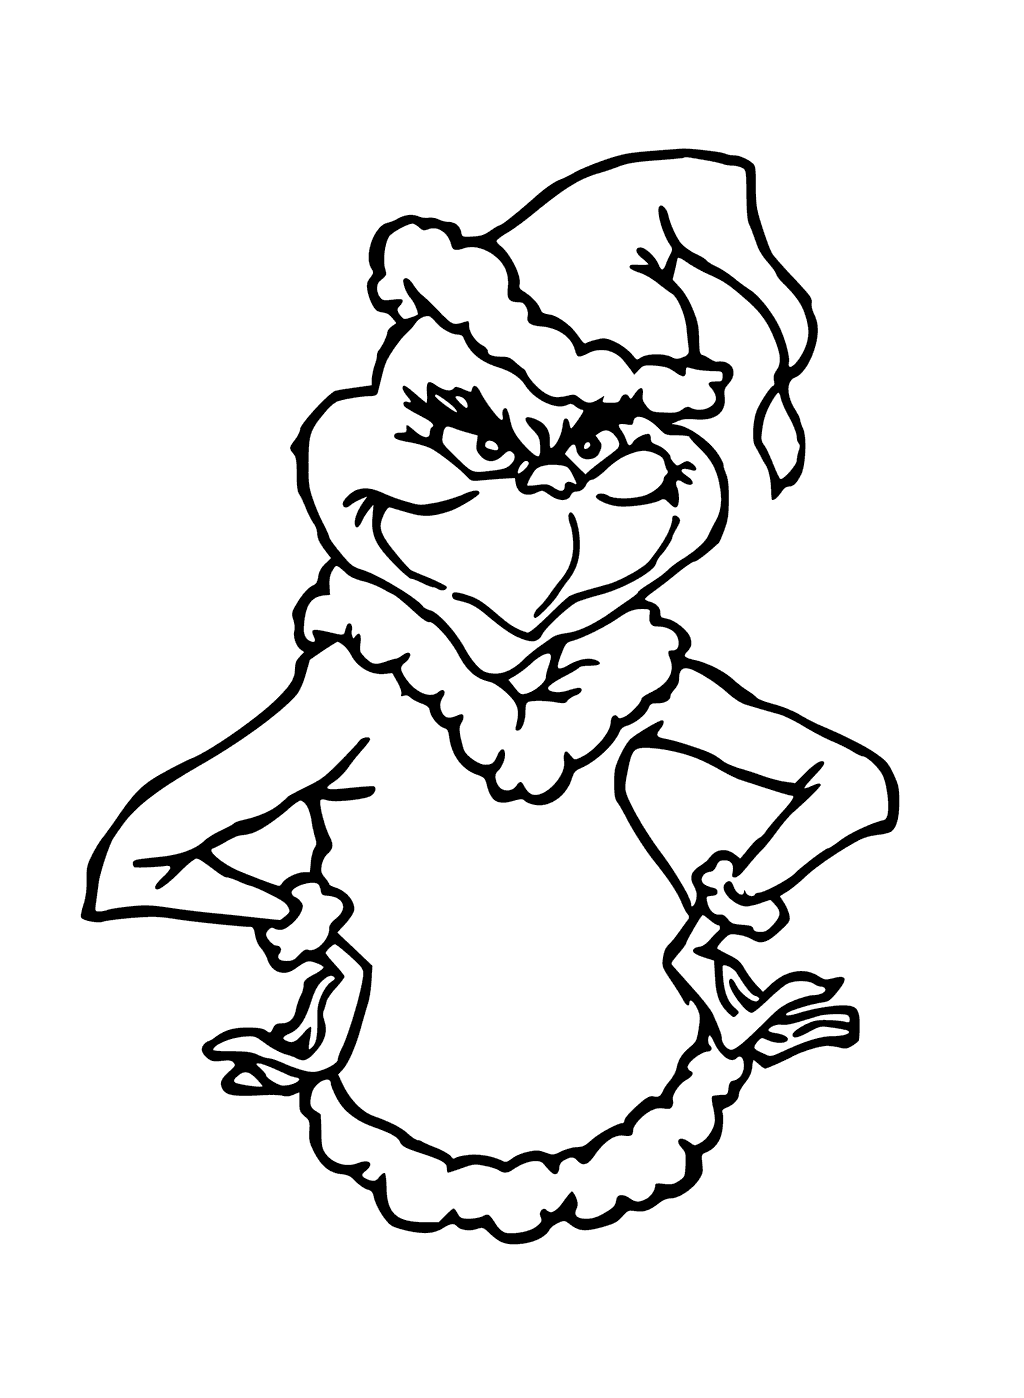 grinch coloring sheets for kids The grinch coloring pages to download and print for free